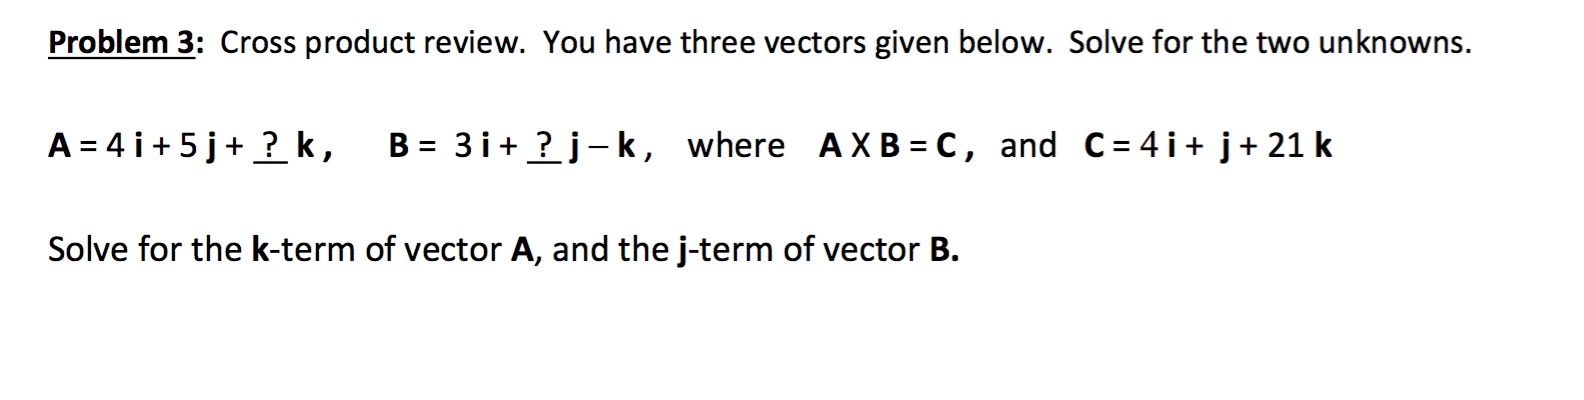 Solved Cross product review. You have three vectors given | Chegg.com